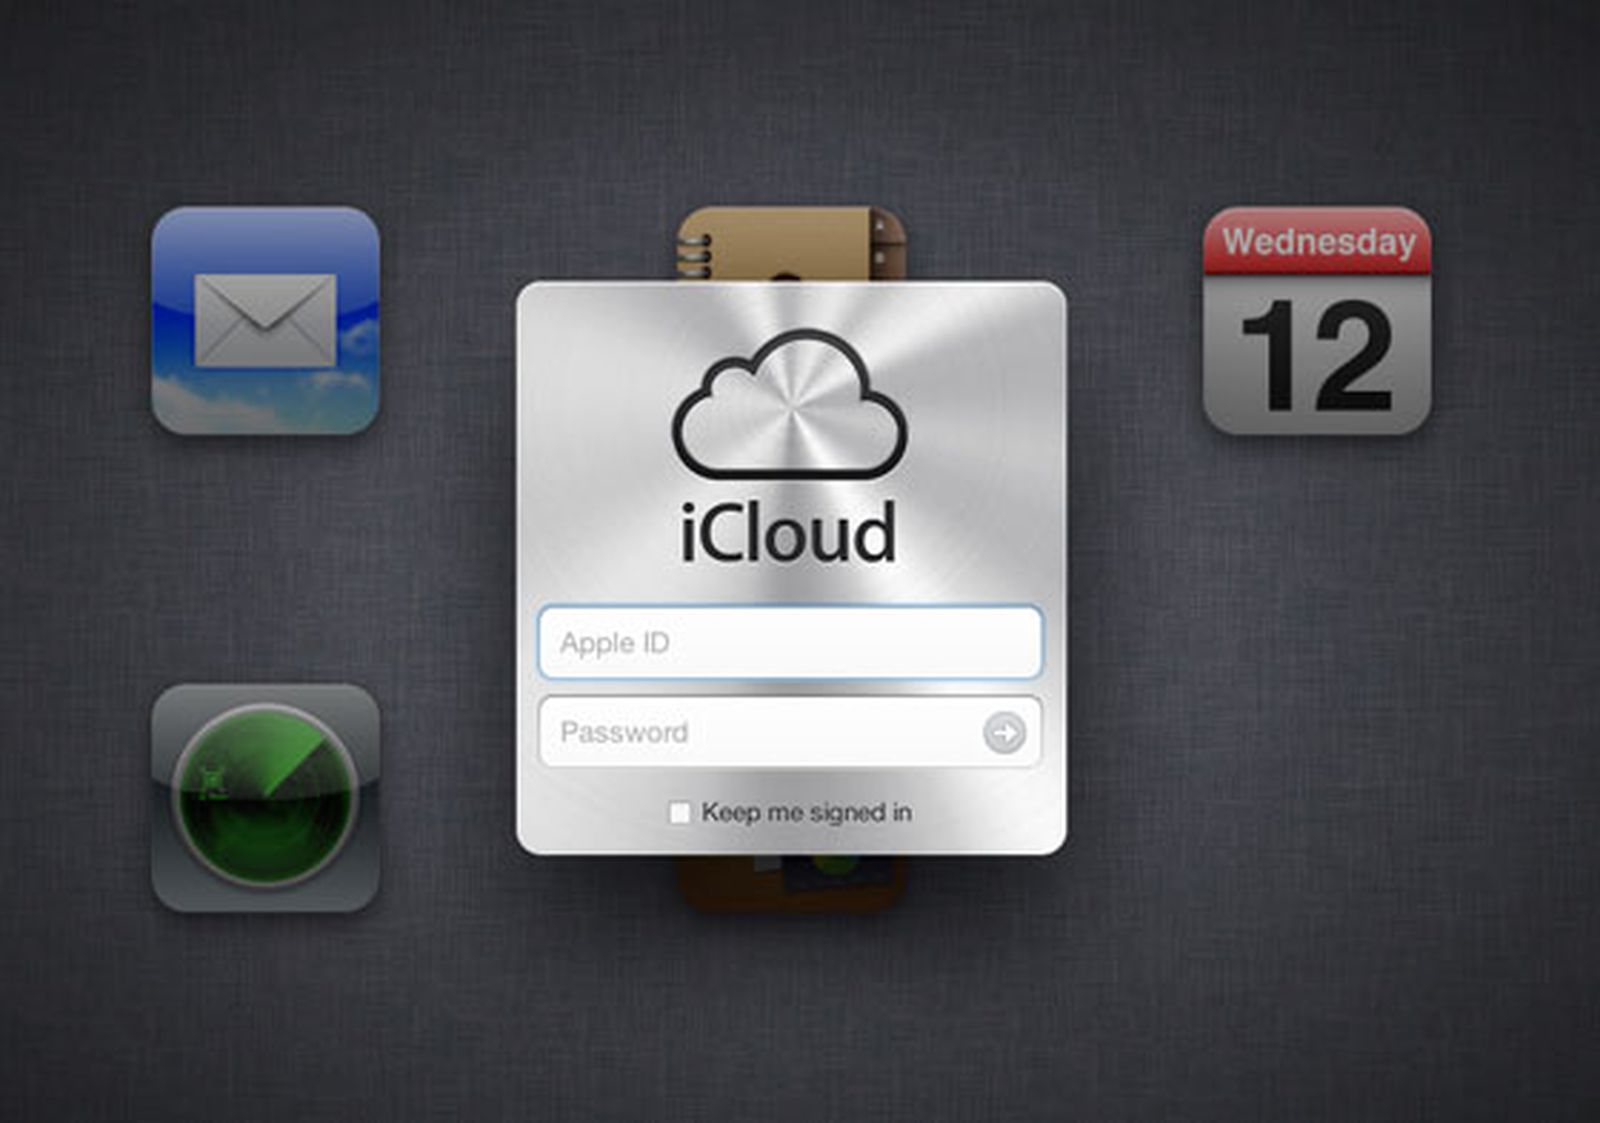 the finishing touches on their new iCloud service. iCloud.com has been upda...